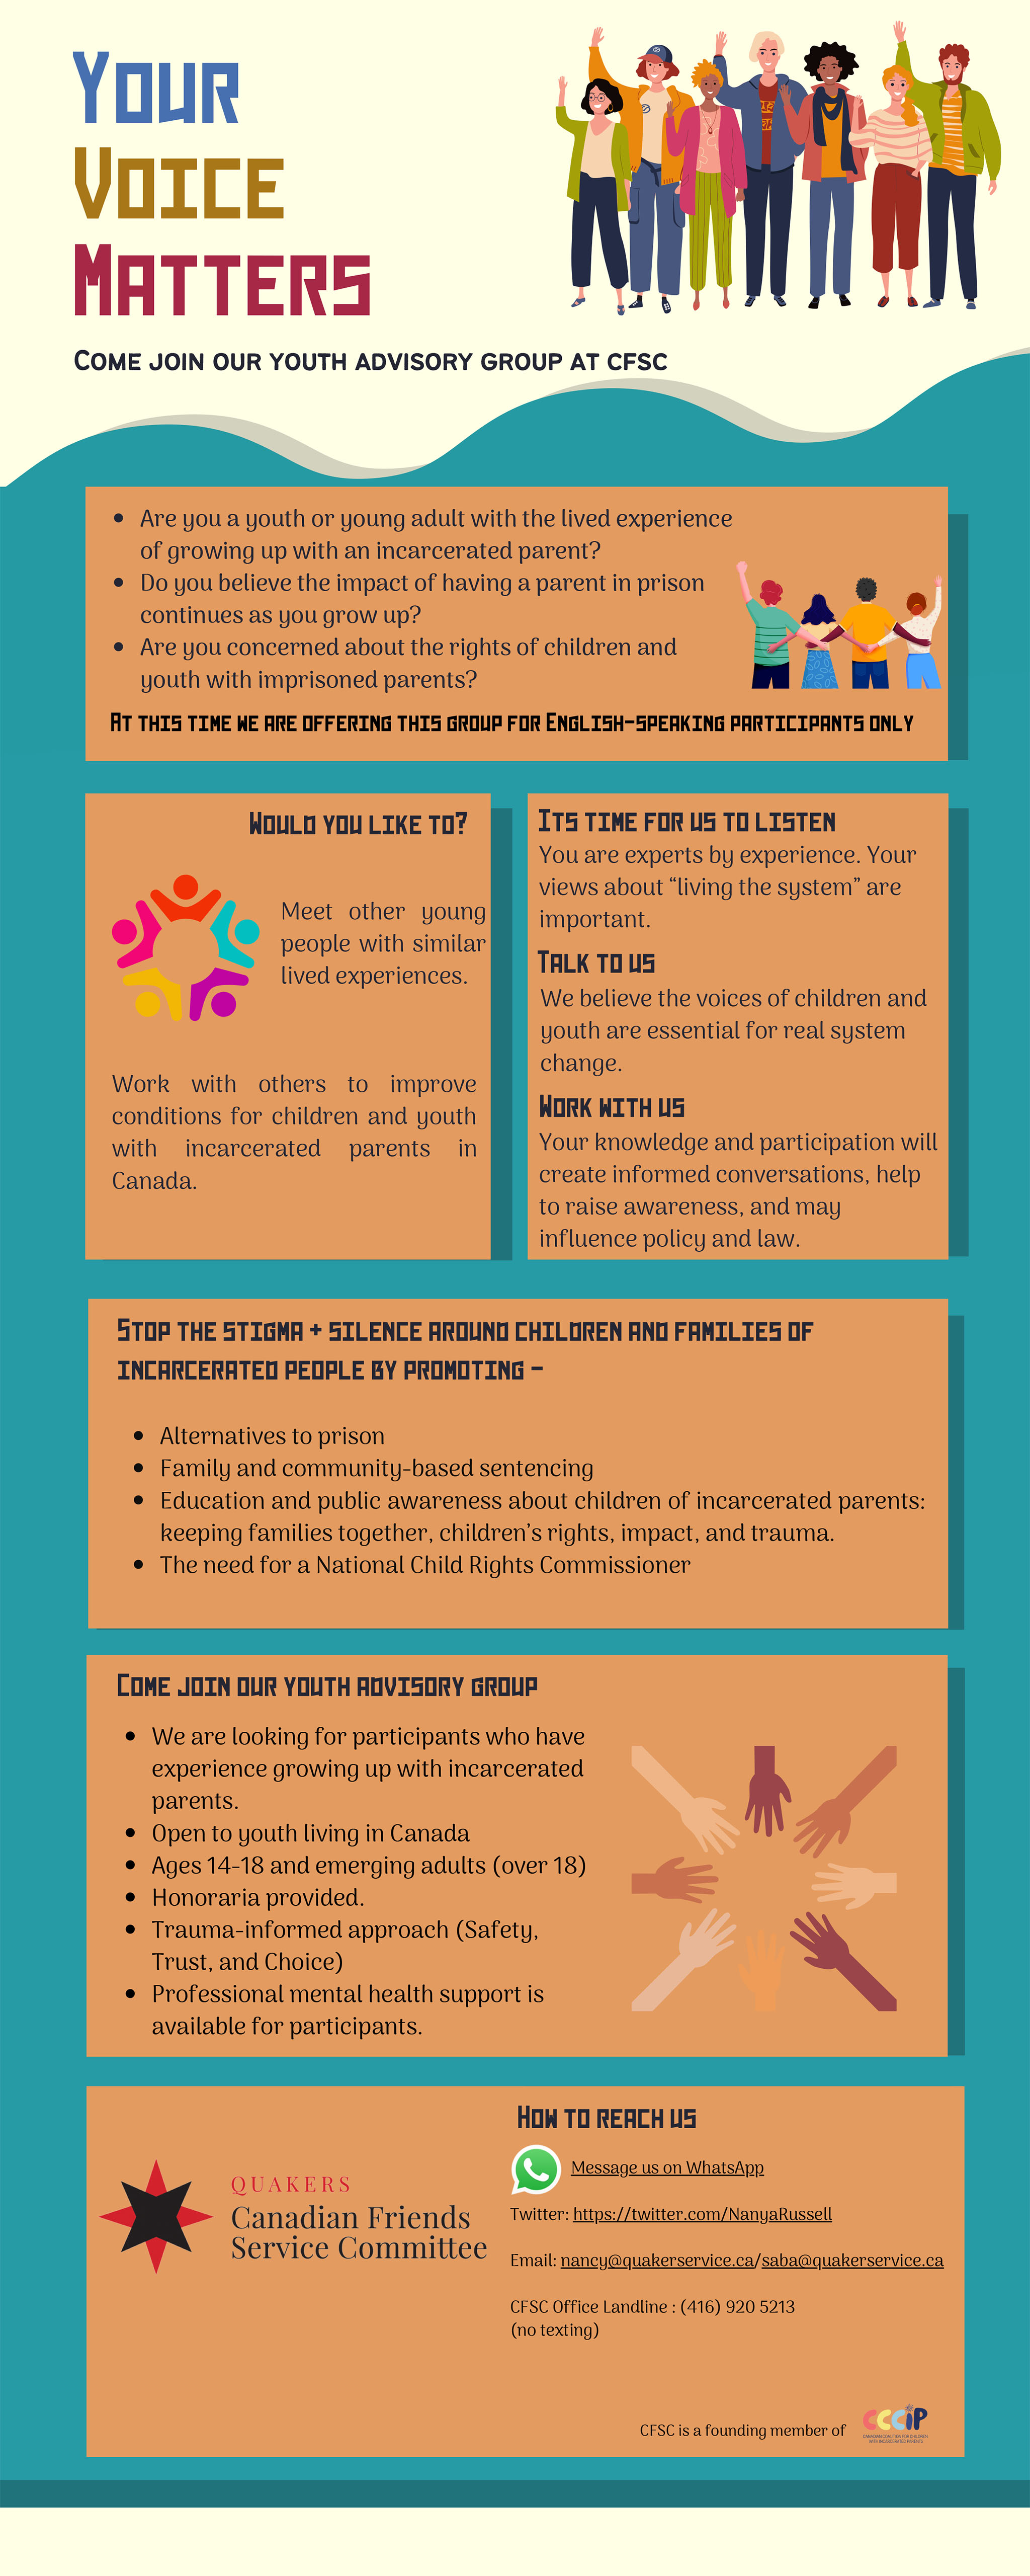 Infographic calling for young people to join a Youth Advisory Group at CFSC